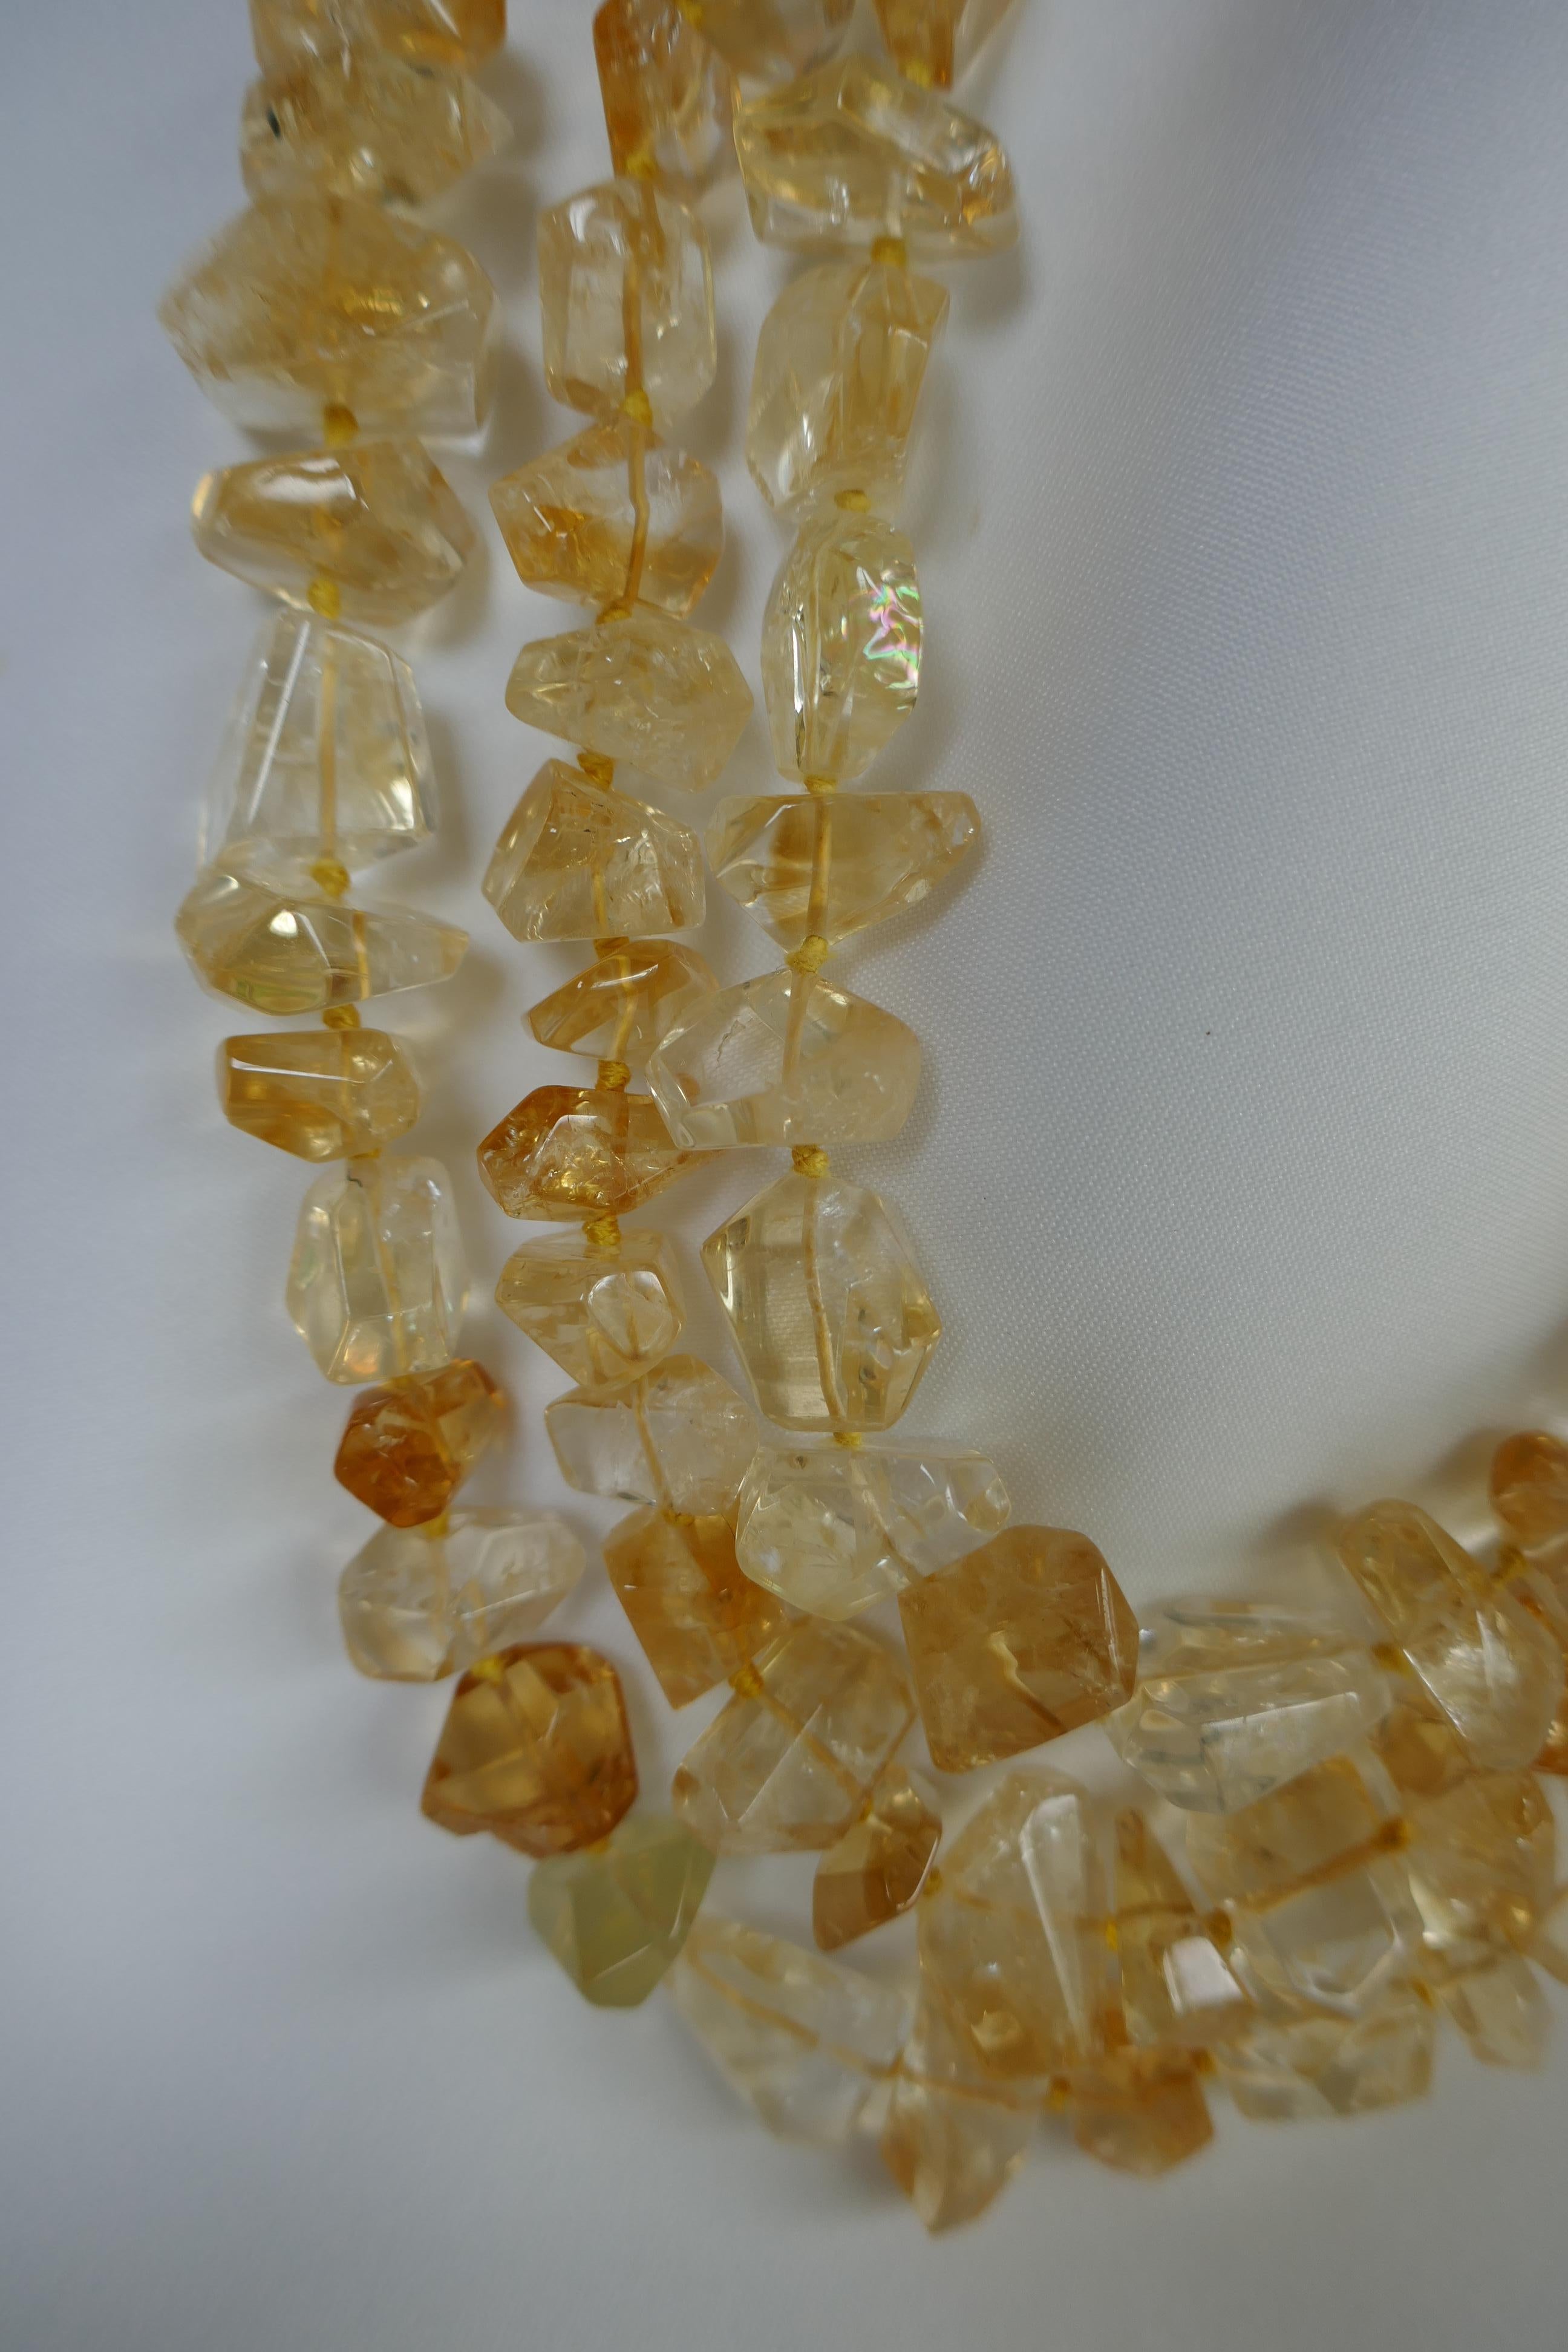 This three strand (multi) strand graduated citrine necklace is absolutely stunning. The citrine faceted nuggets have a lot of life and are beautiful. The necklace nest perfectly. The clasp is 925 vermeil silver. It is strung and knotted on yellow